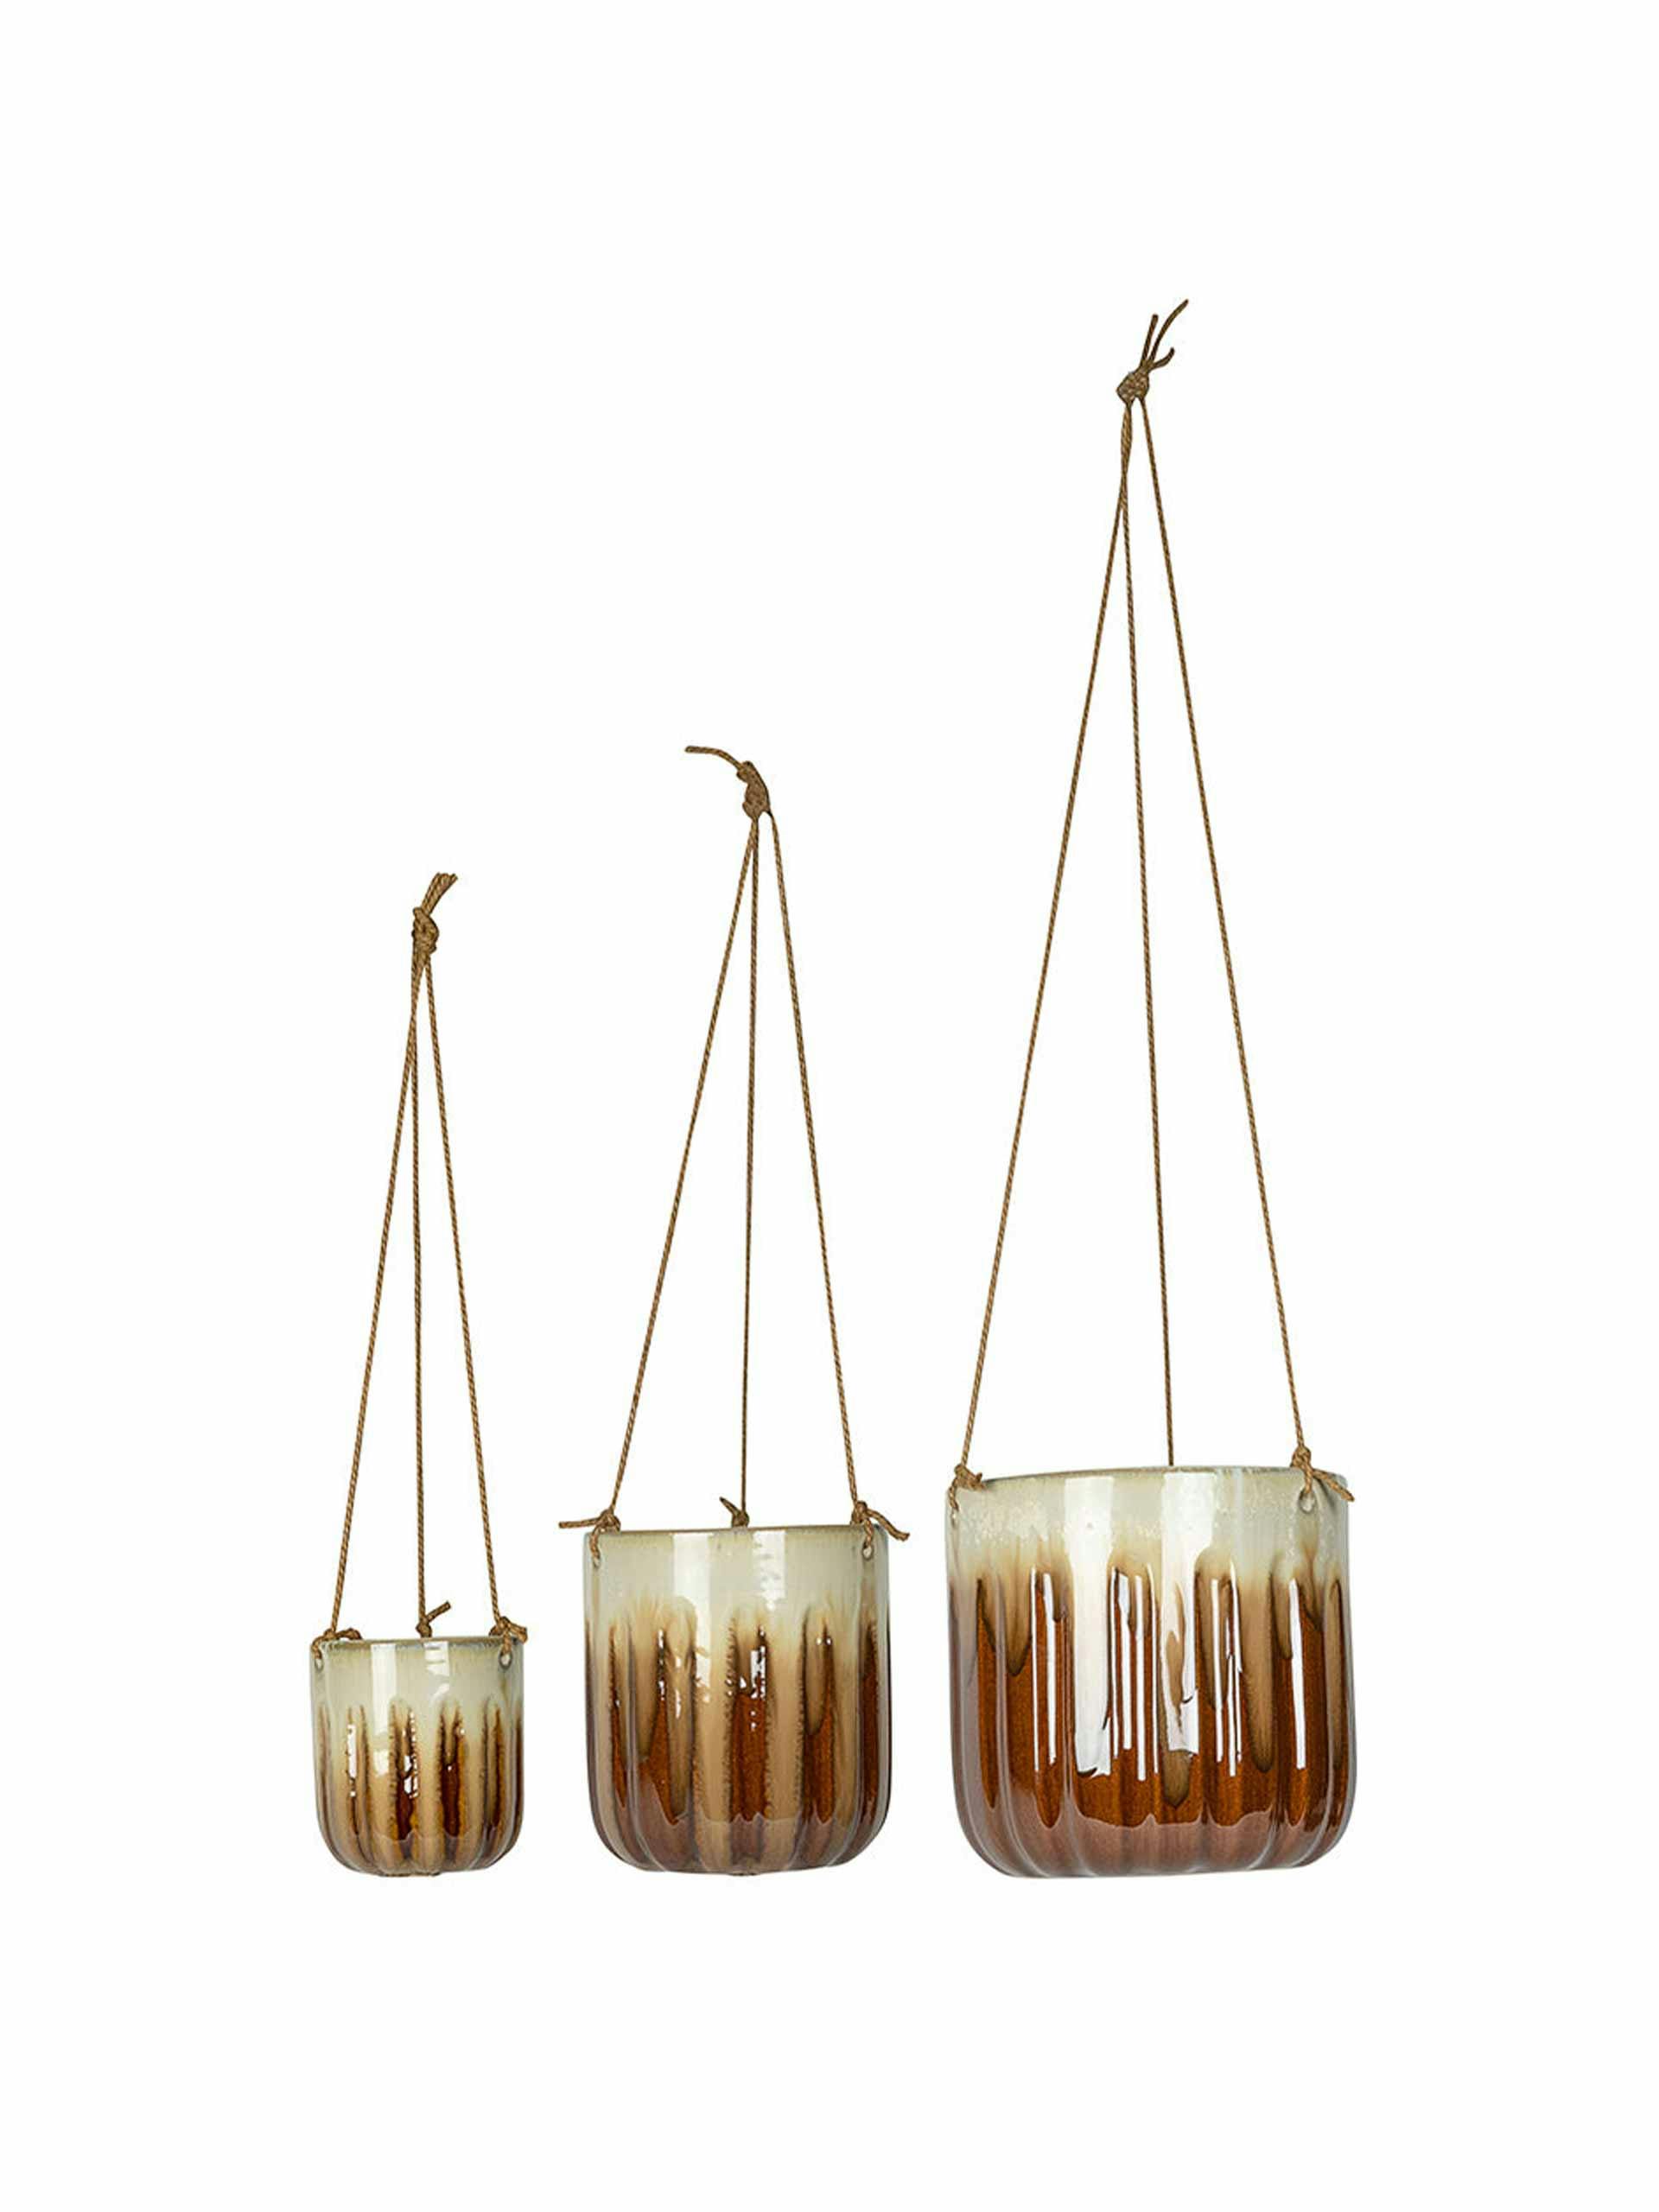 Hanging dipped plant pots (set of 3)